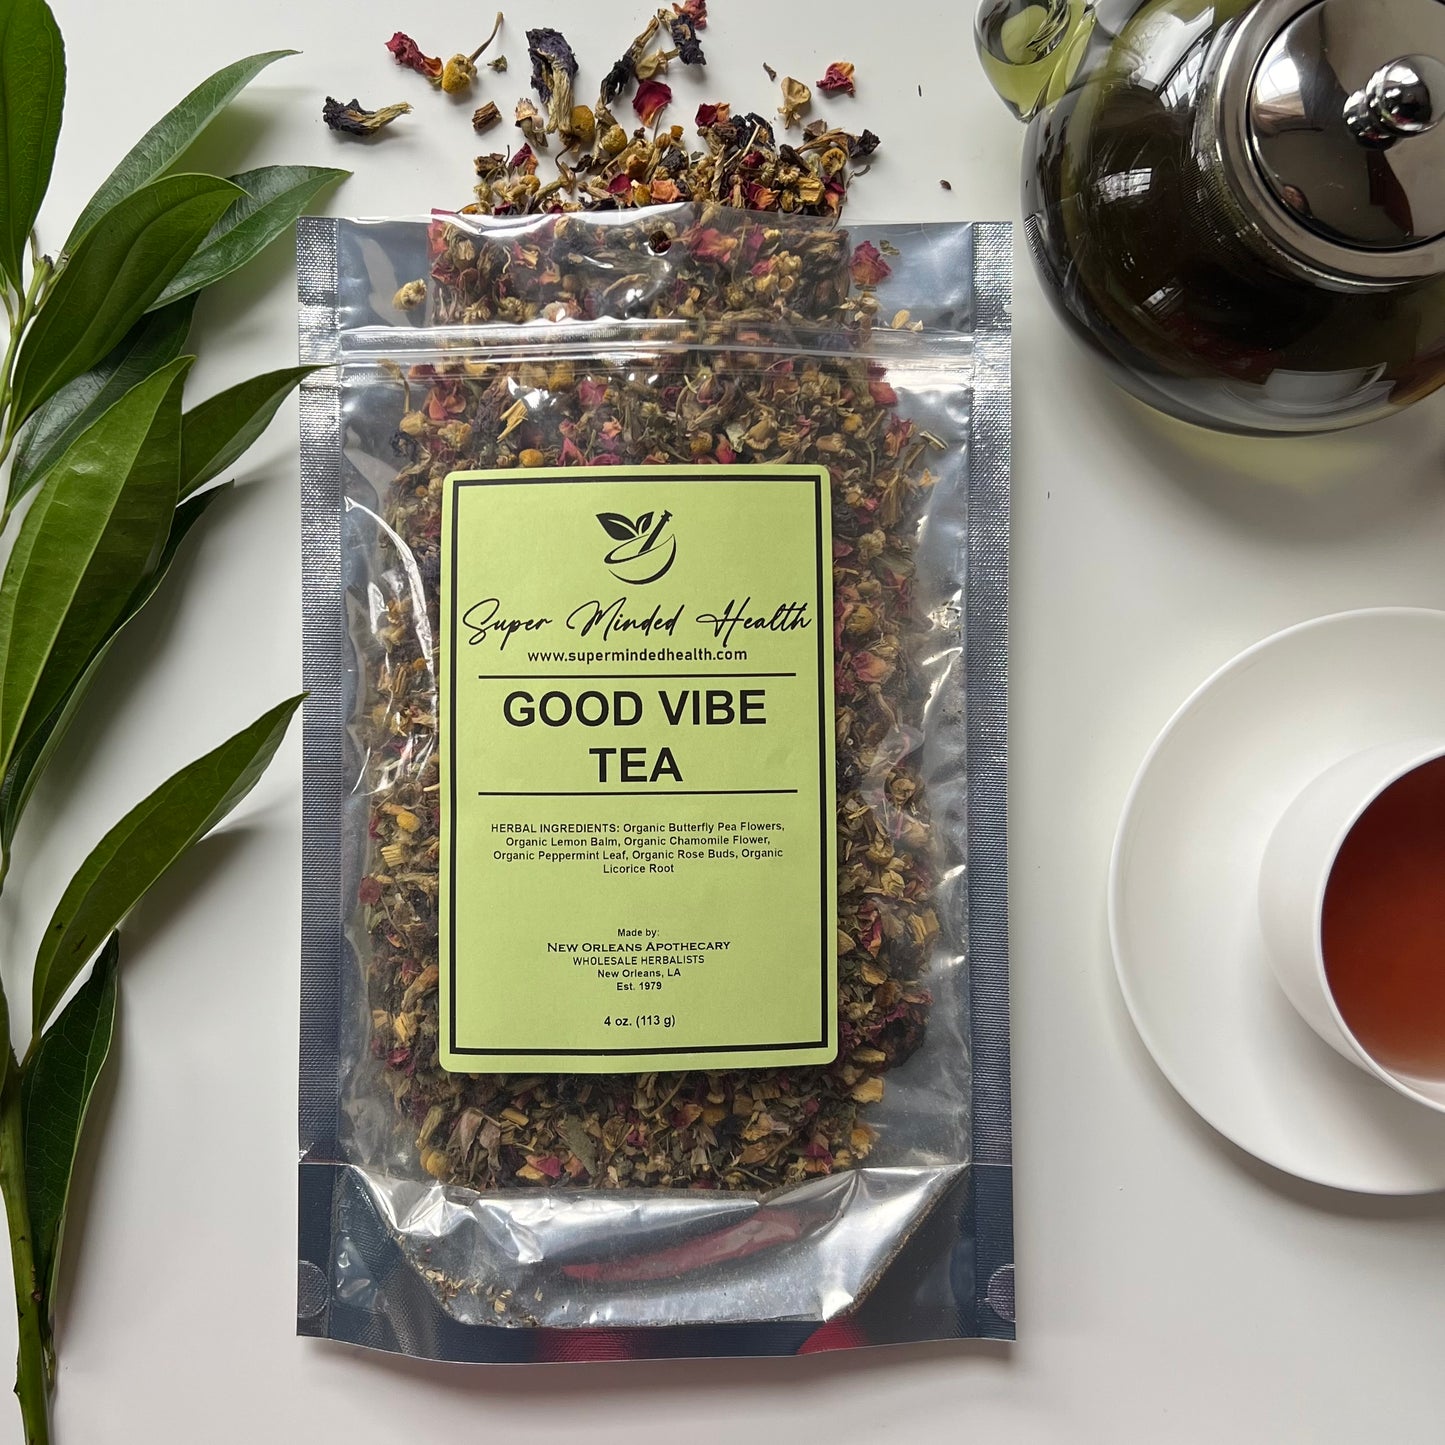 Good Vibe Tea (32 Servings) Loose Organic Herbal Tea Revitalize Butterfly Pea Blend Simply Delicious!